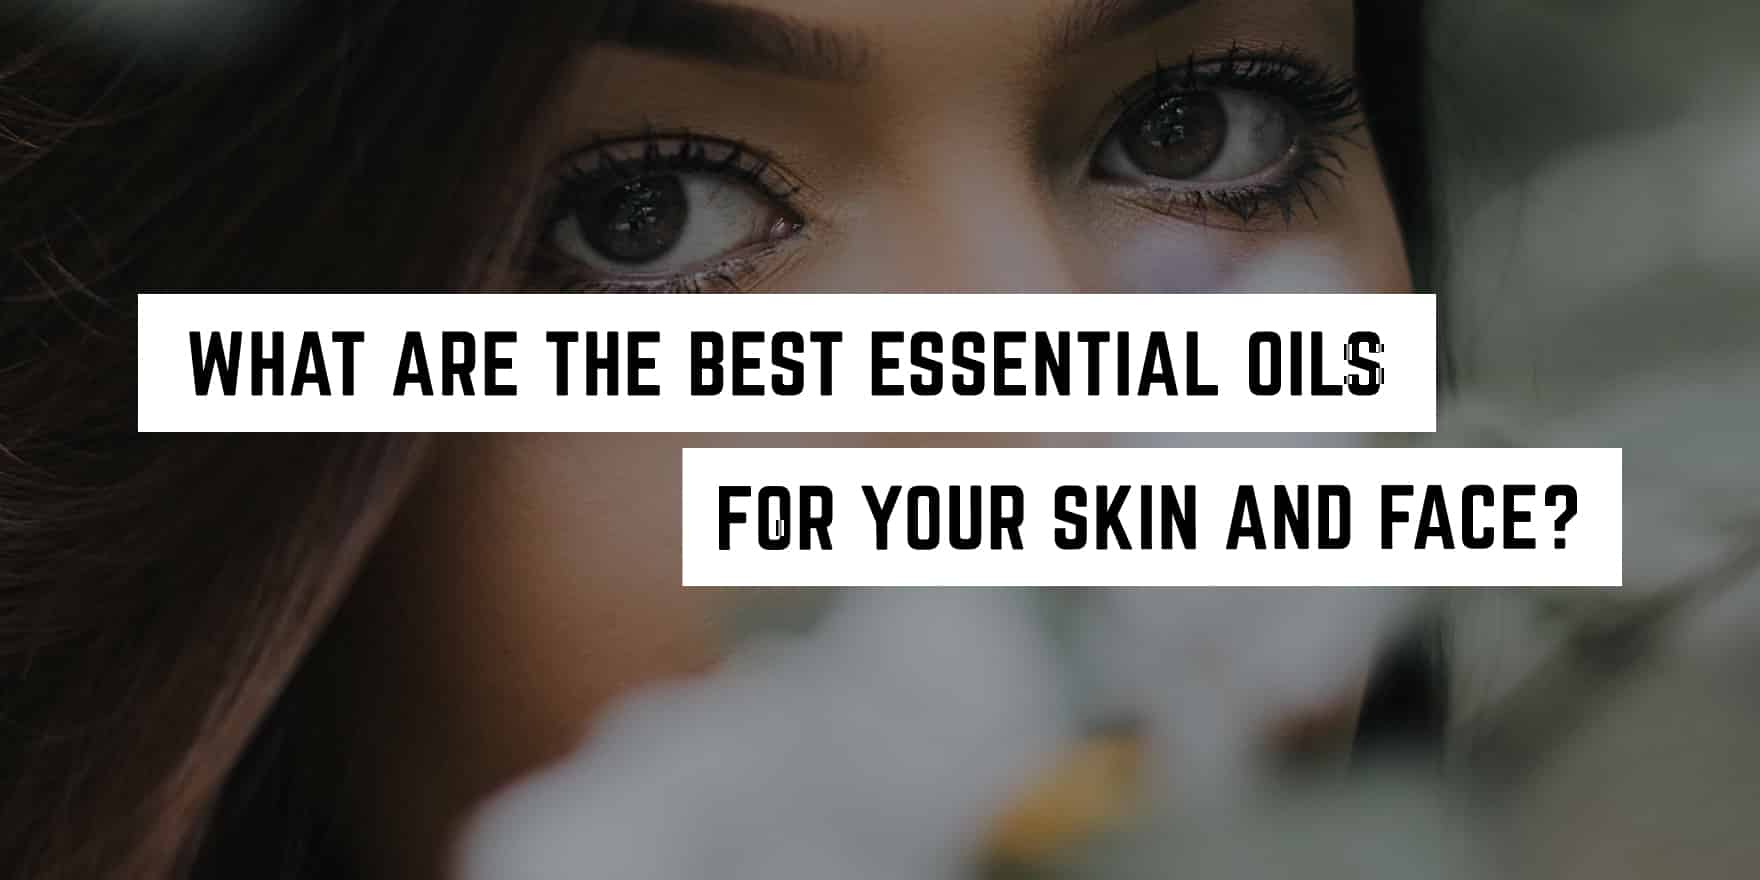 What are the Best Essential Oils for Your Skin and Face?